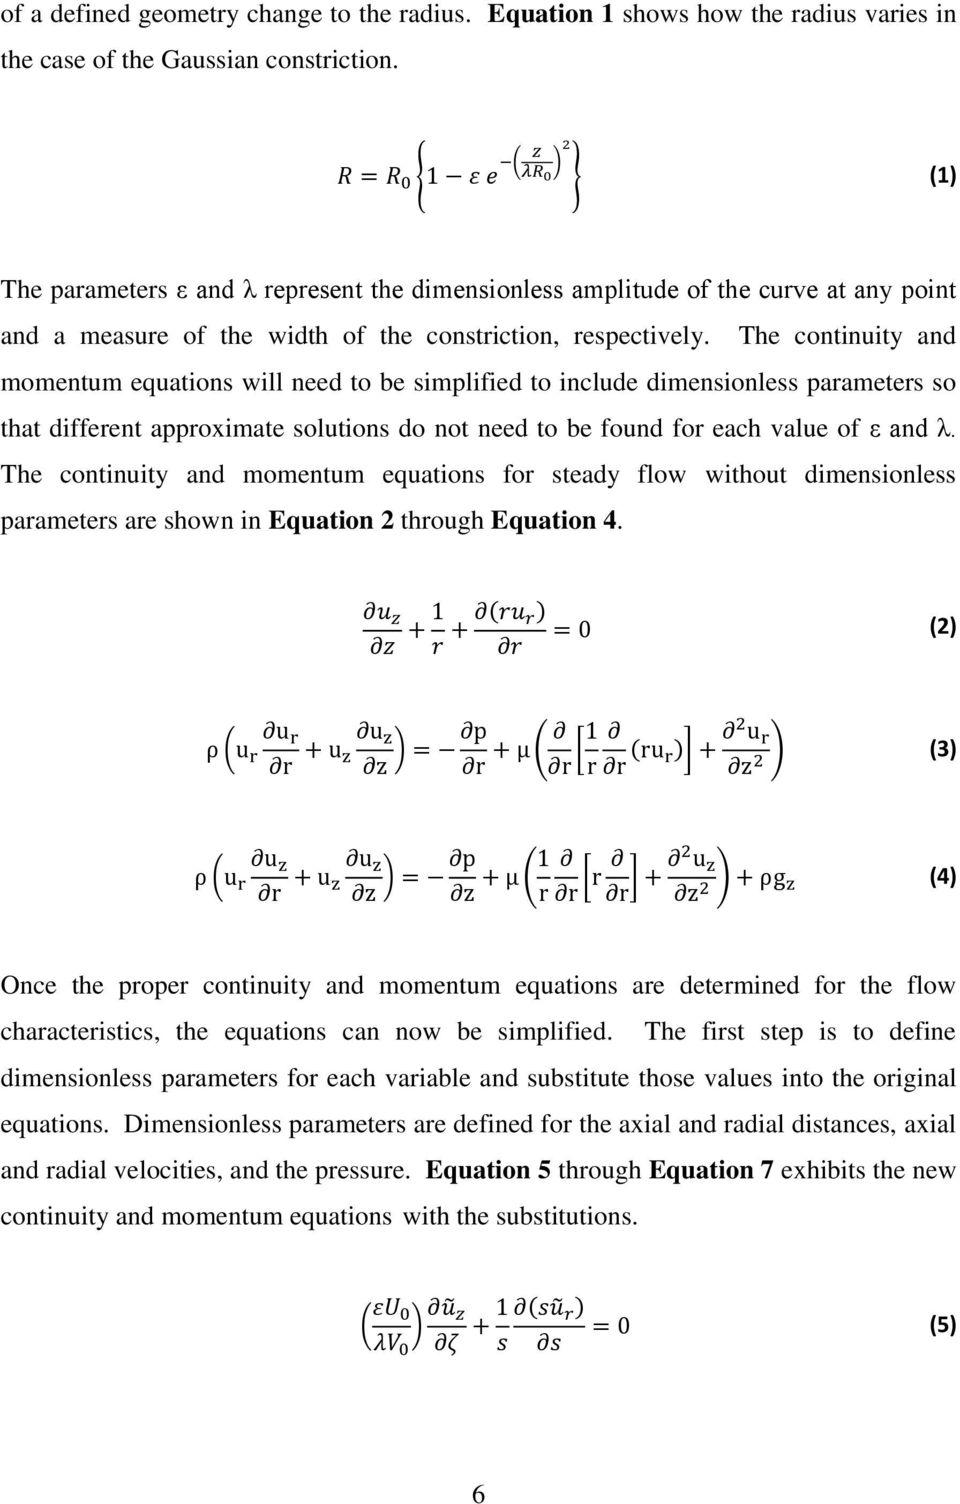 The continuity and momentum equations will need to be simplified to include dimensionless parameters so that different approximate solutions do not need to be found for each value of ε and λ.